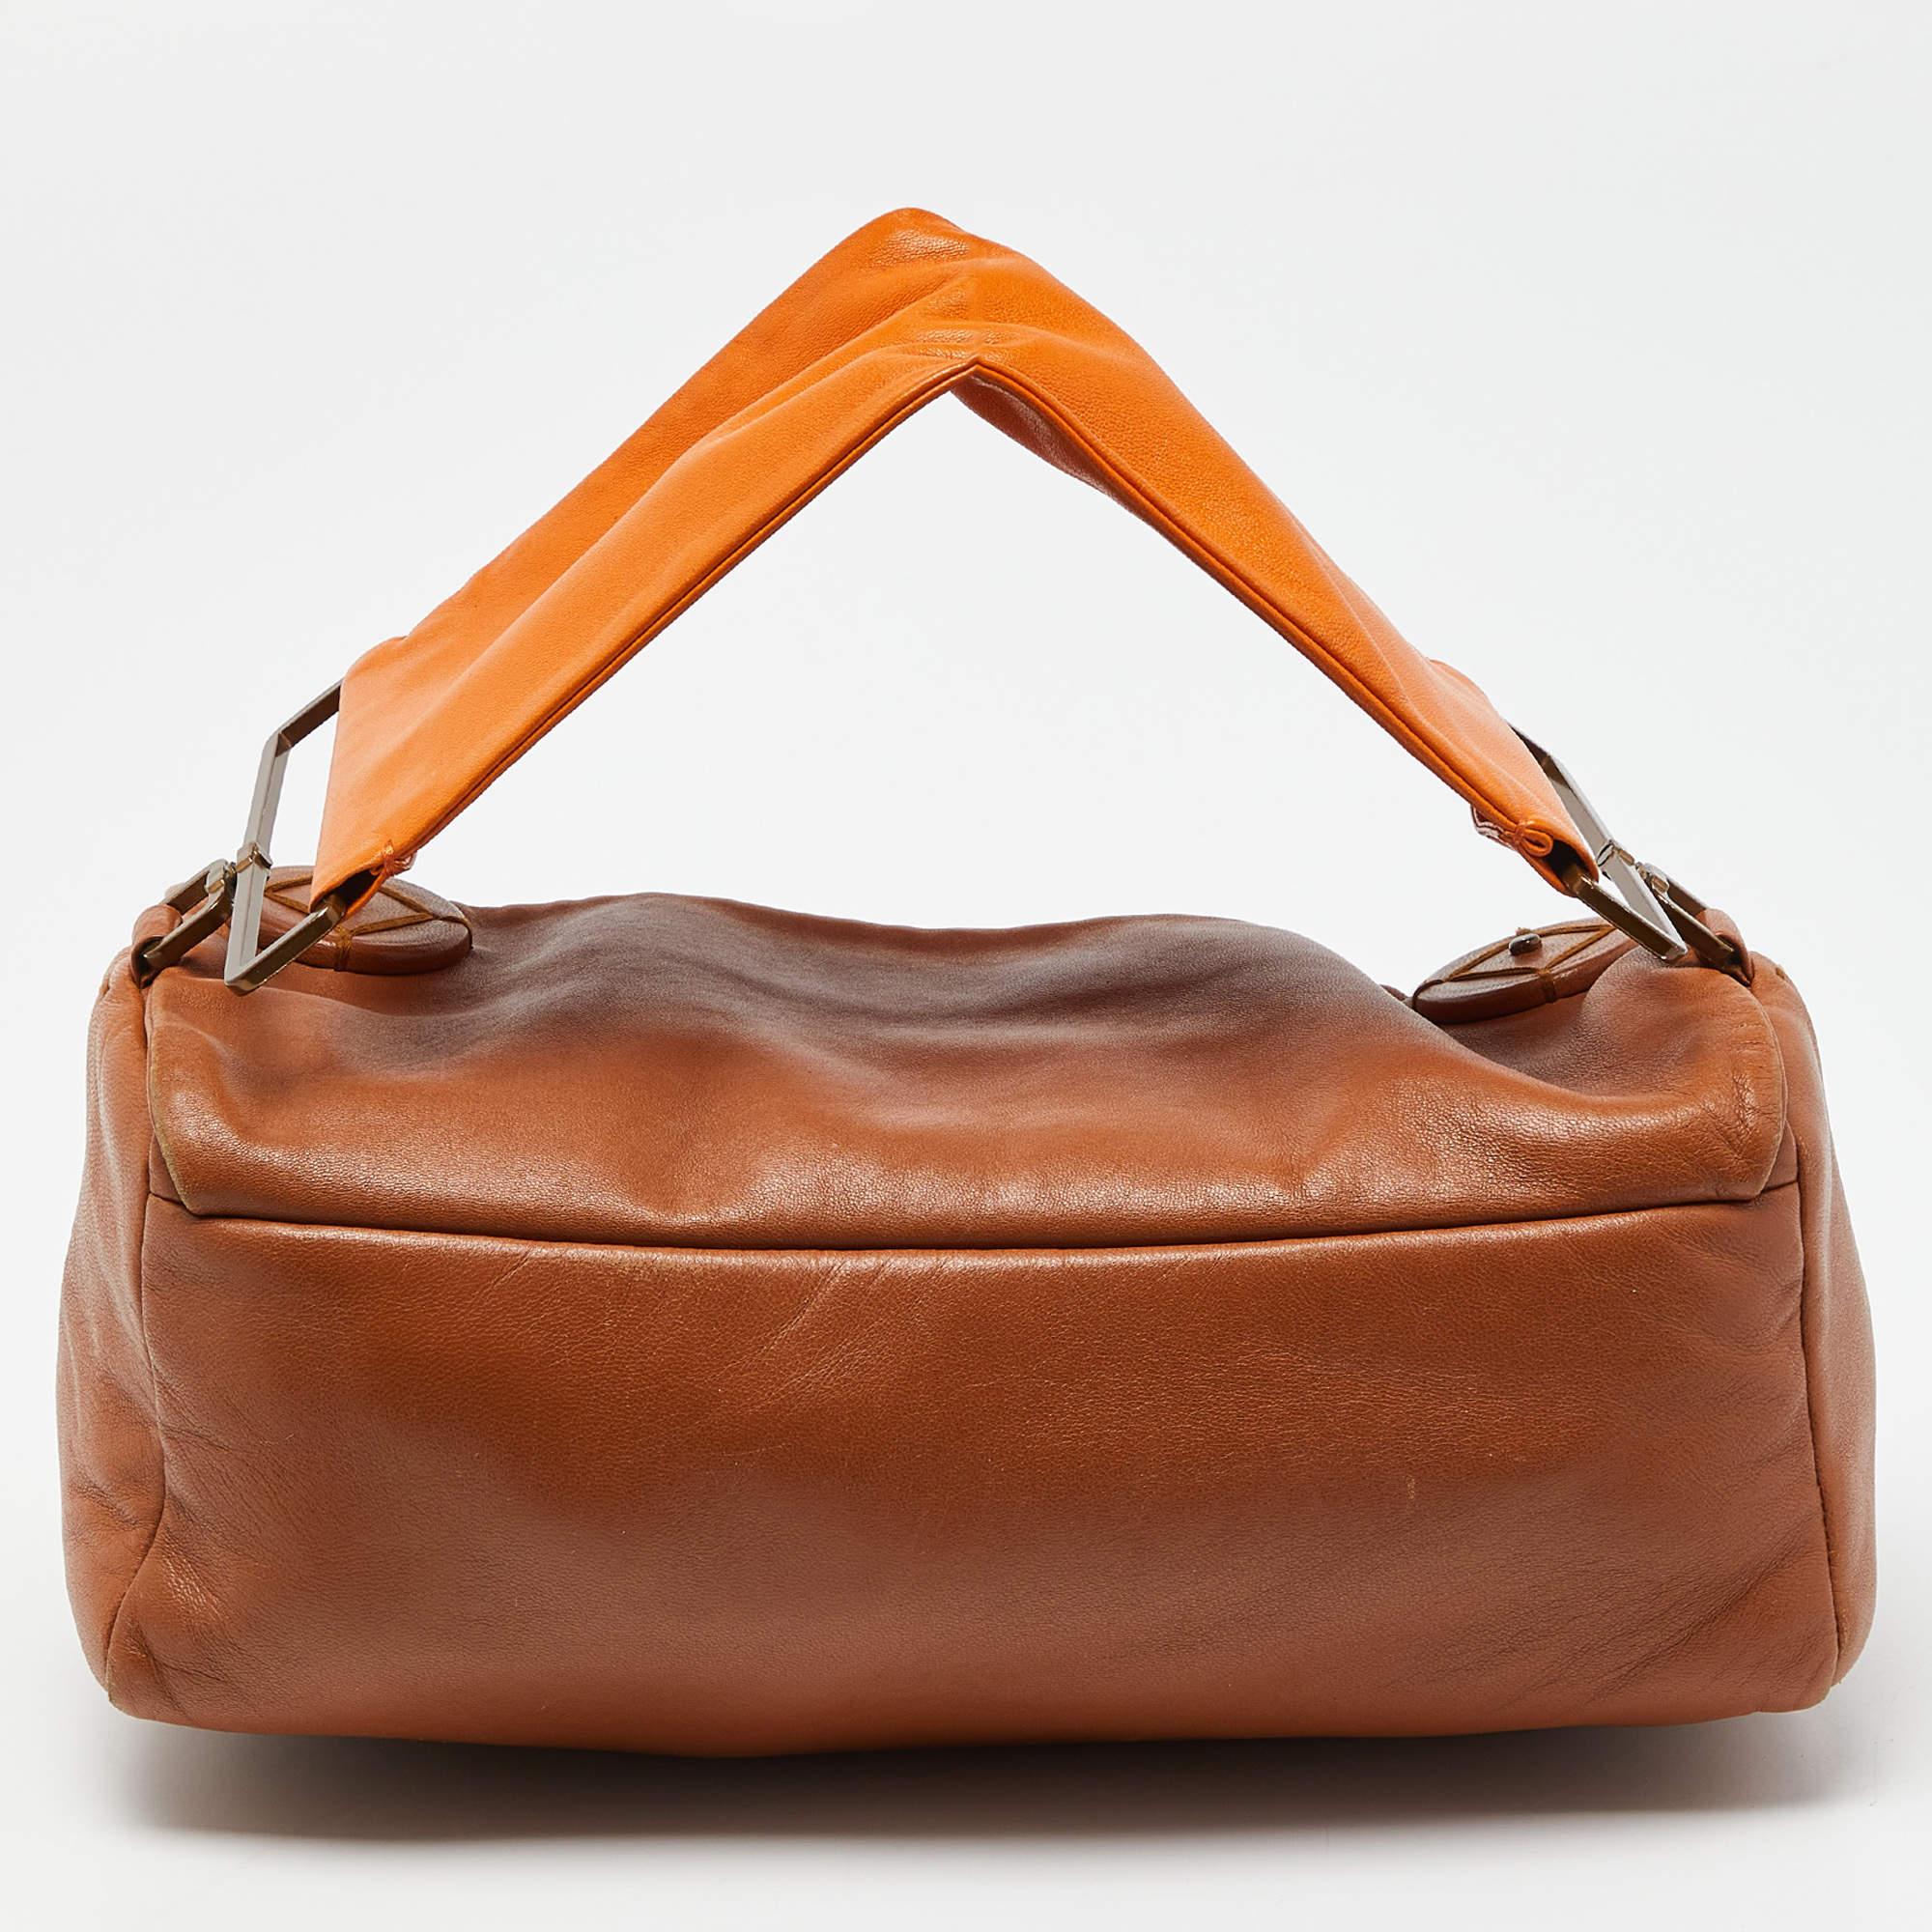 This satchel is rendered in the finest quality materials into an elegant design. Versatile and functional, it is well-sized for your daily use.

Includes: Original Dustbag